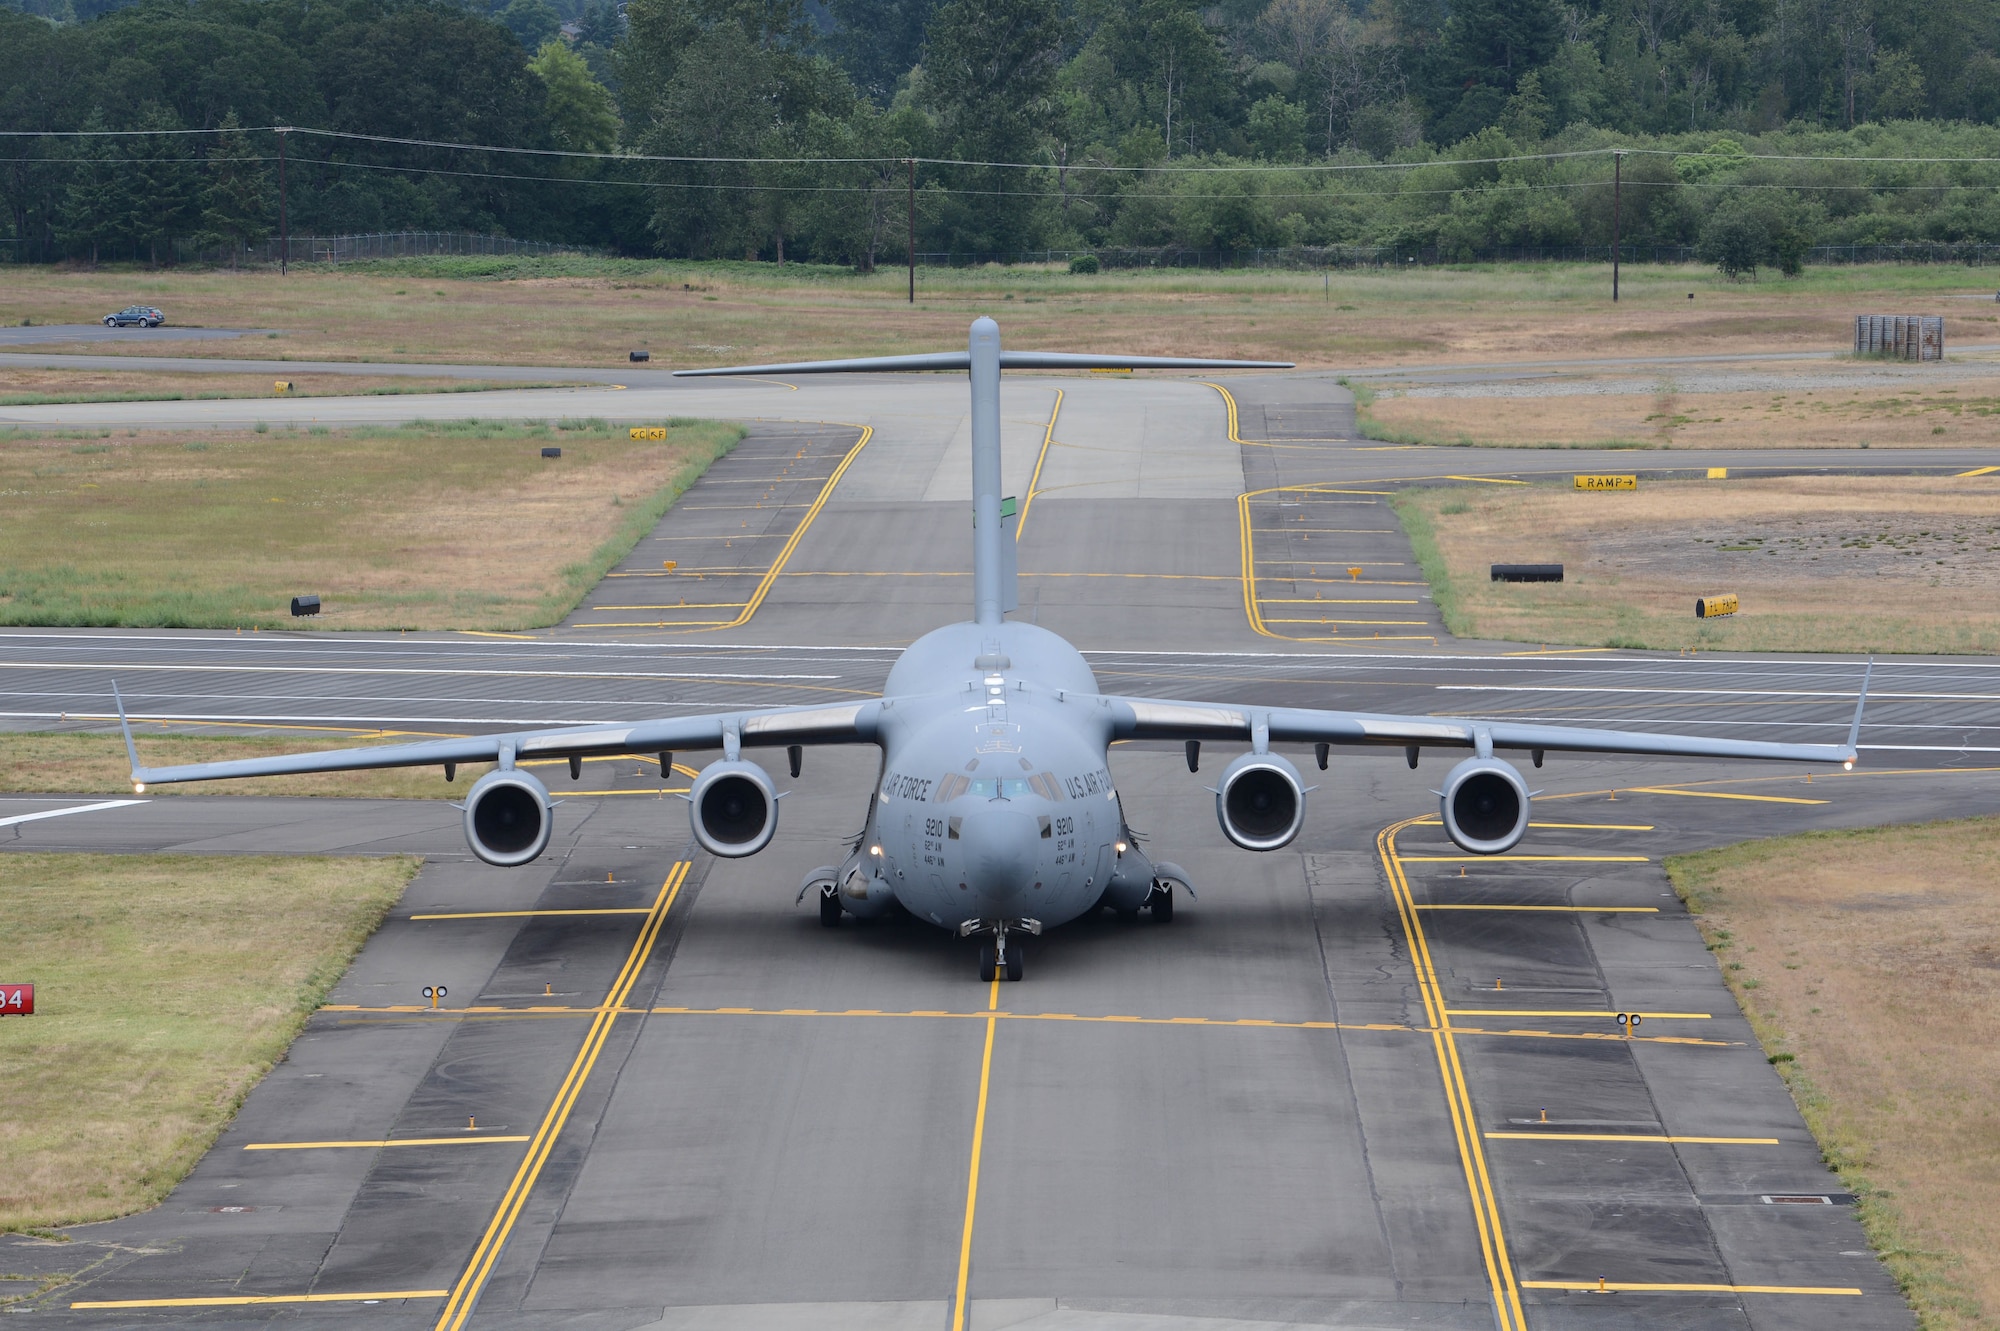 The first aircraft to land on the newly resurfaced runway taxis to its parking spot June 17, 2019 at Joint Base Lewis-McChord, Wash. McChord Field aircraft and Airmen were relocated to other west coast bases while the runway was resurfaced. (U.S. Air Force photo by Airman 1st Class Sara Hoerichs)